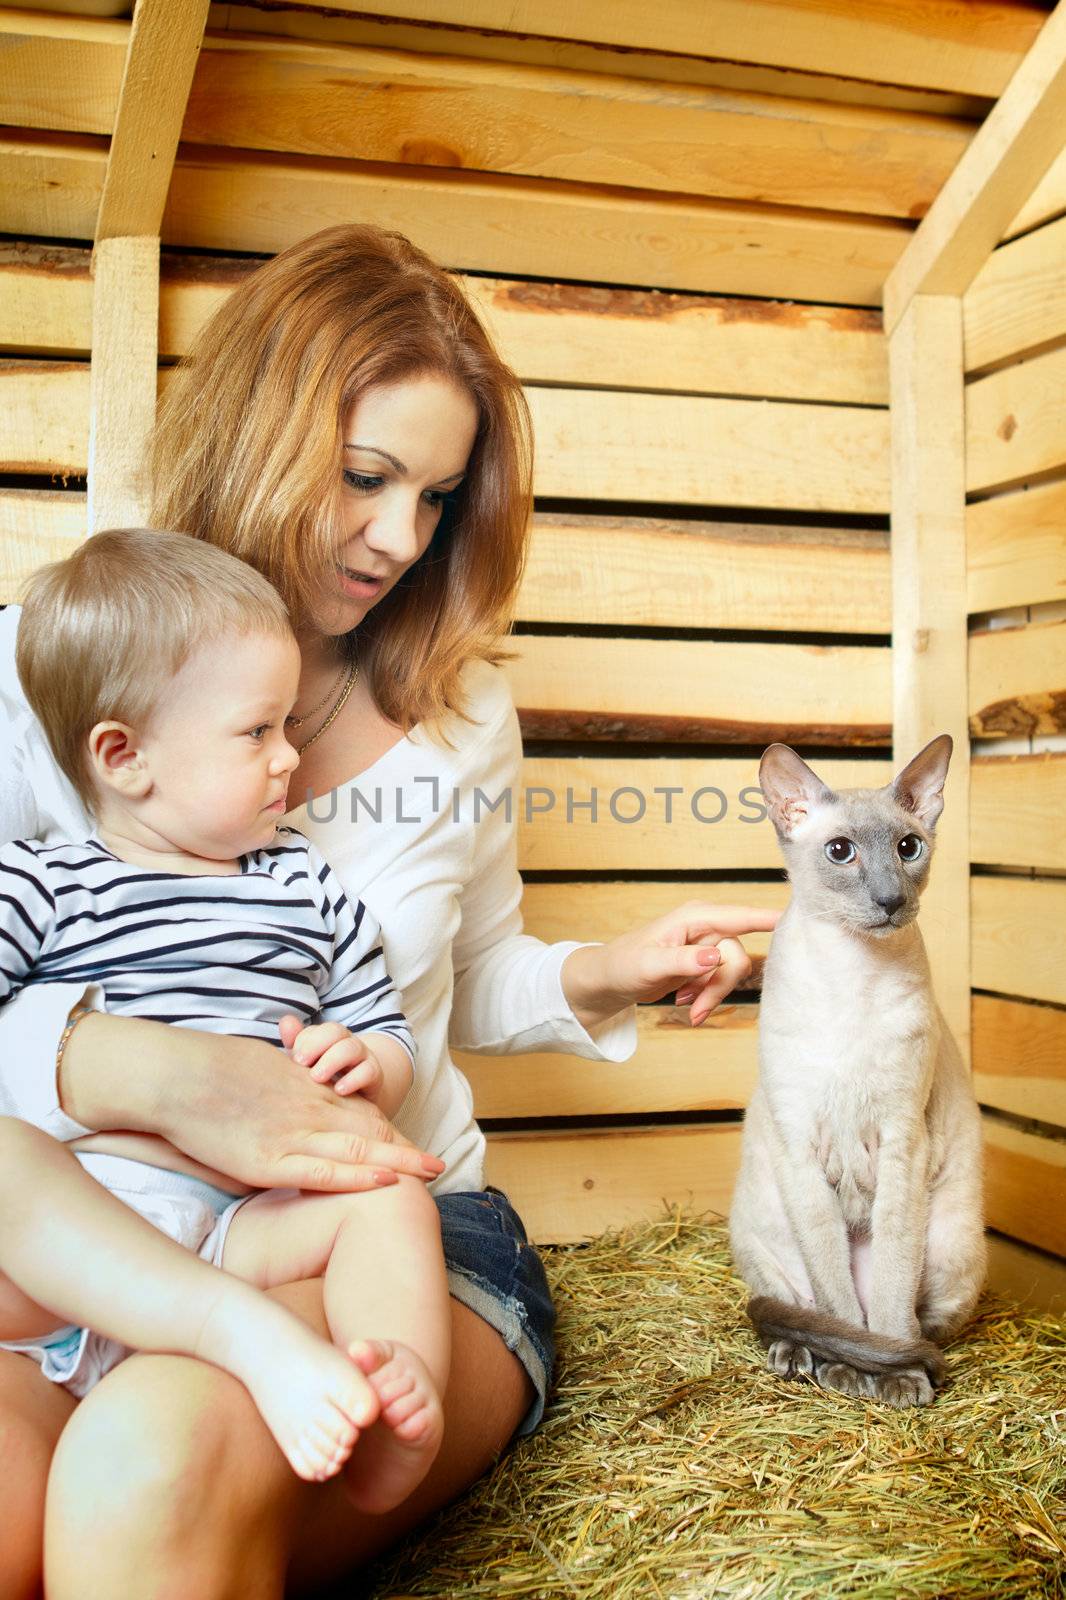 Mother, Baby and Cat by petr_malyshev